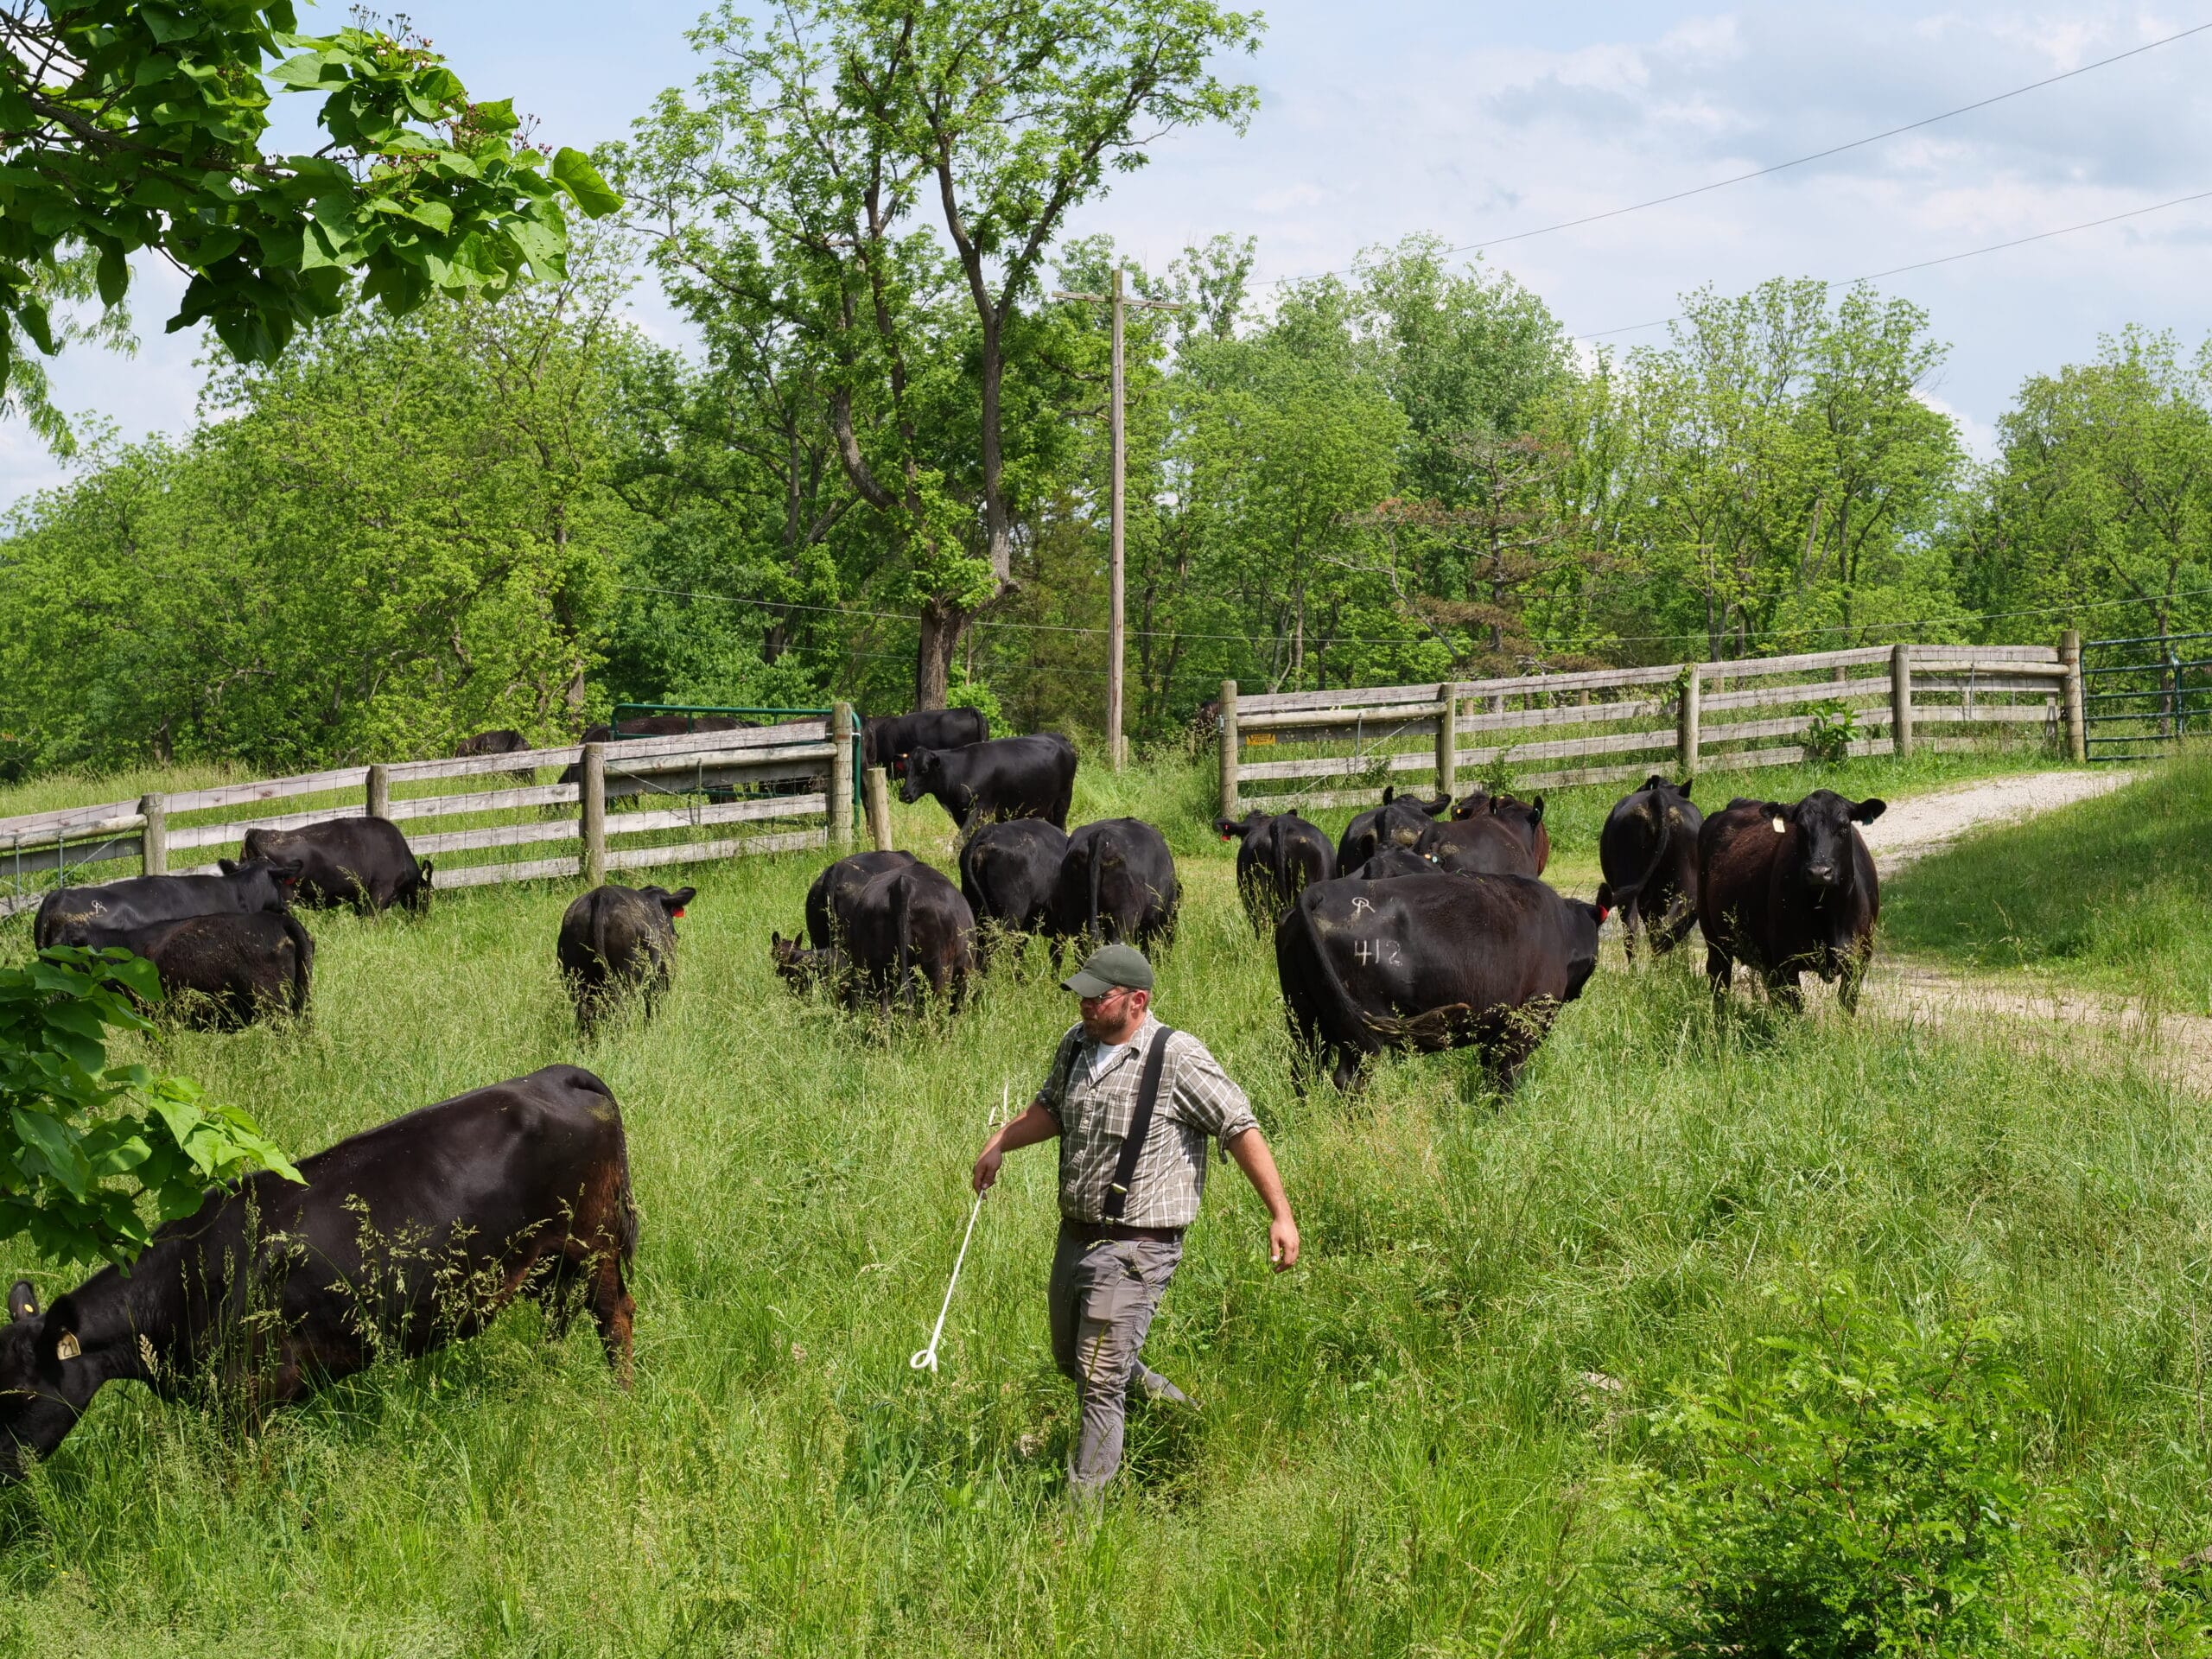 cows in grass field with one farm hand employee